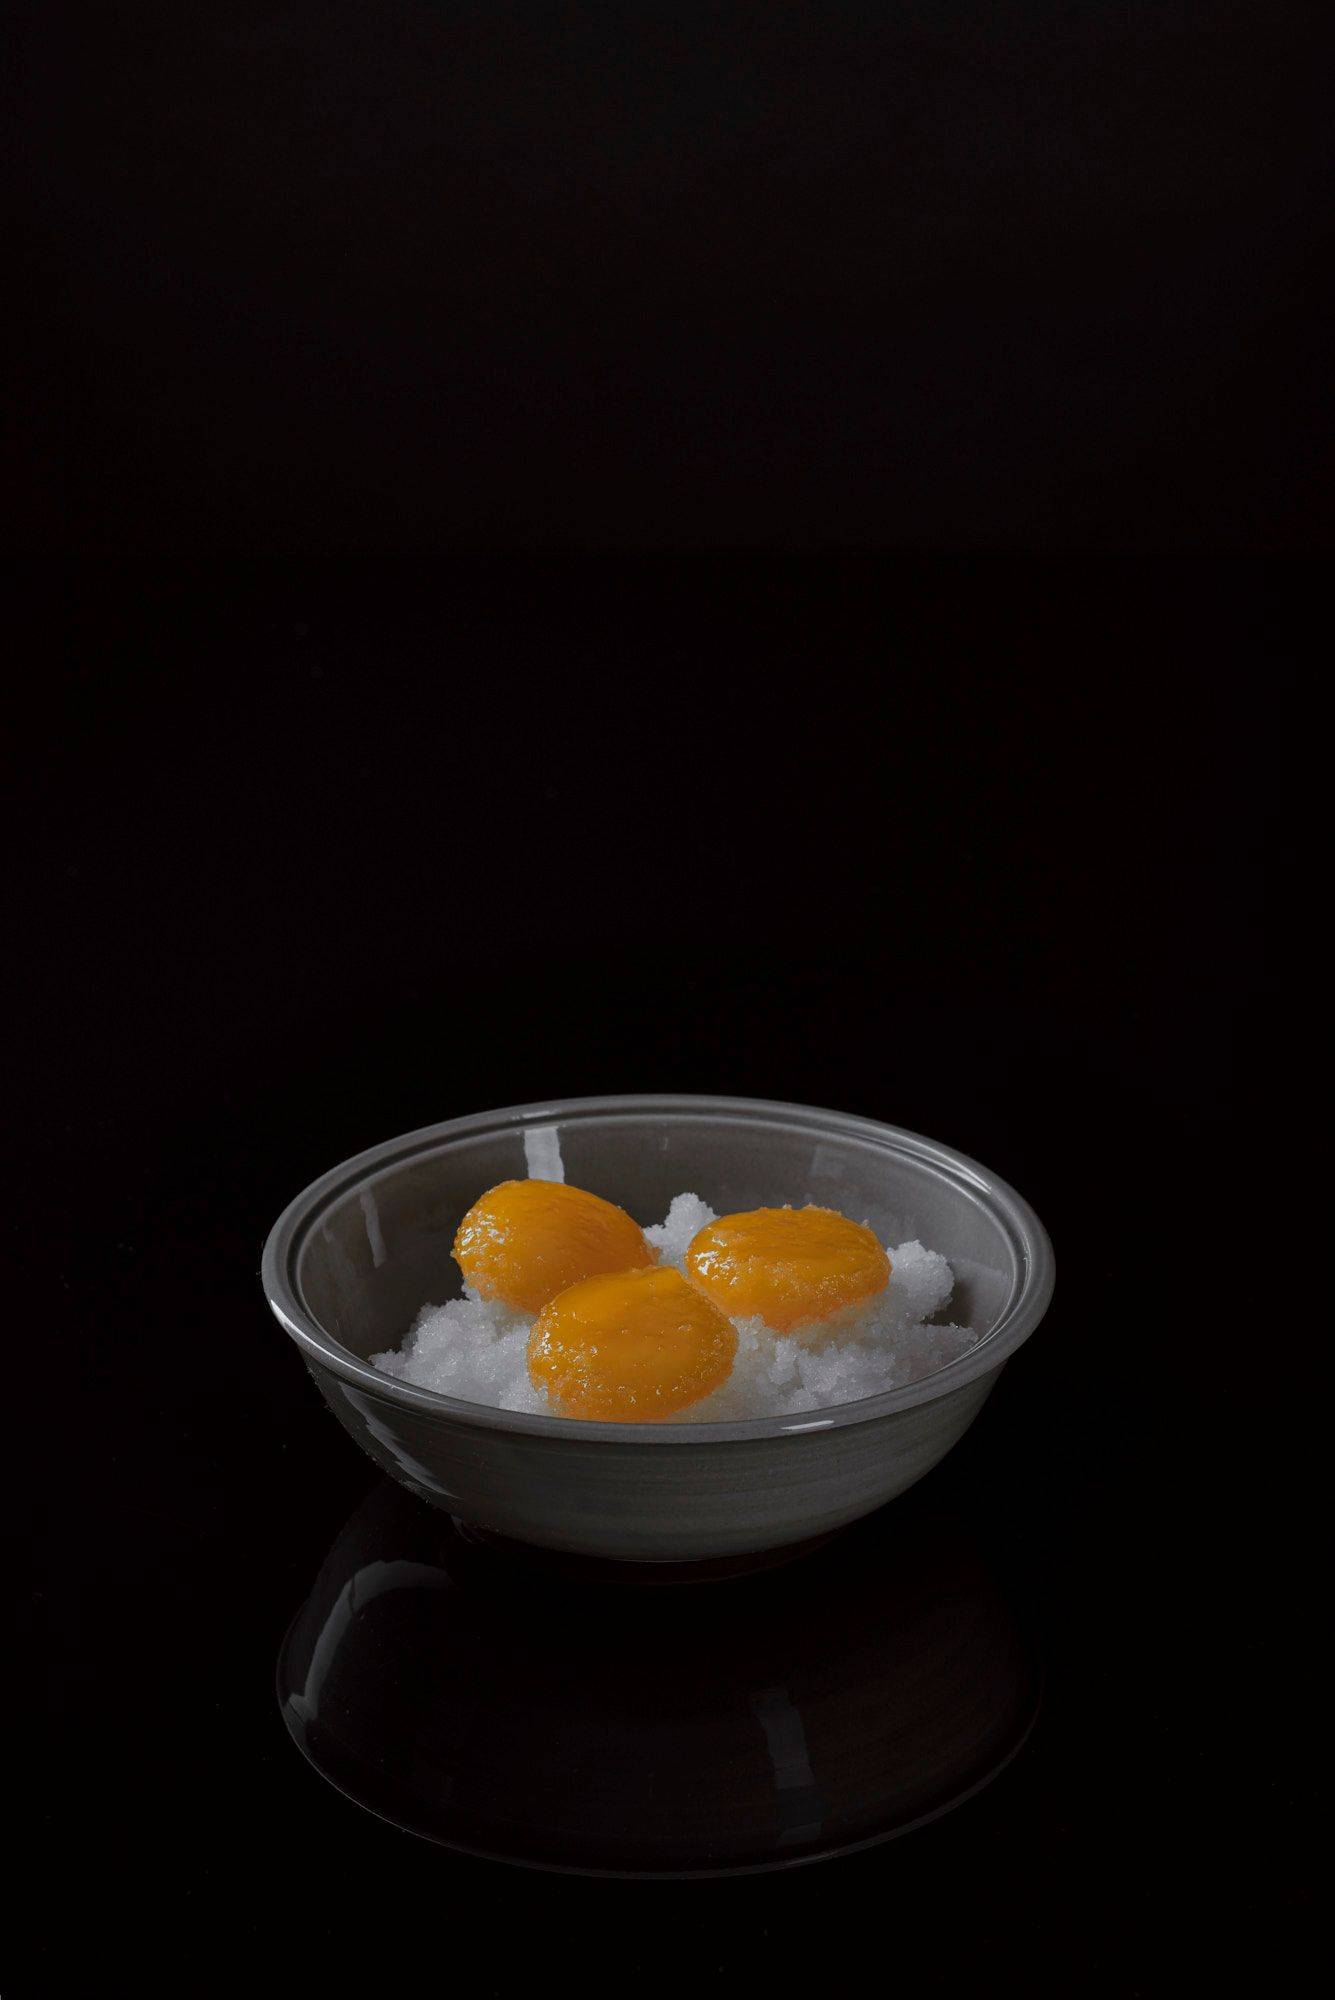 cured egg yolks with black background